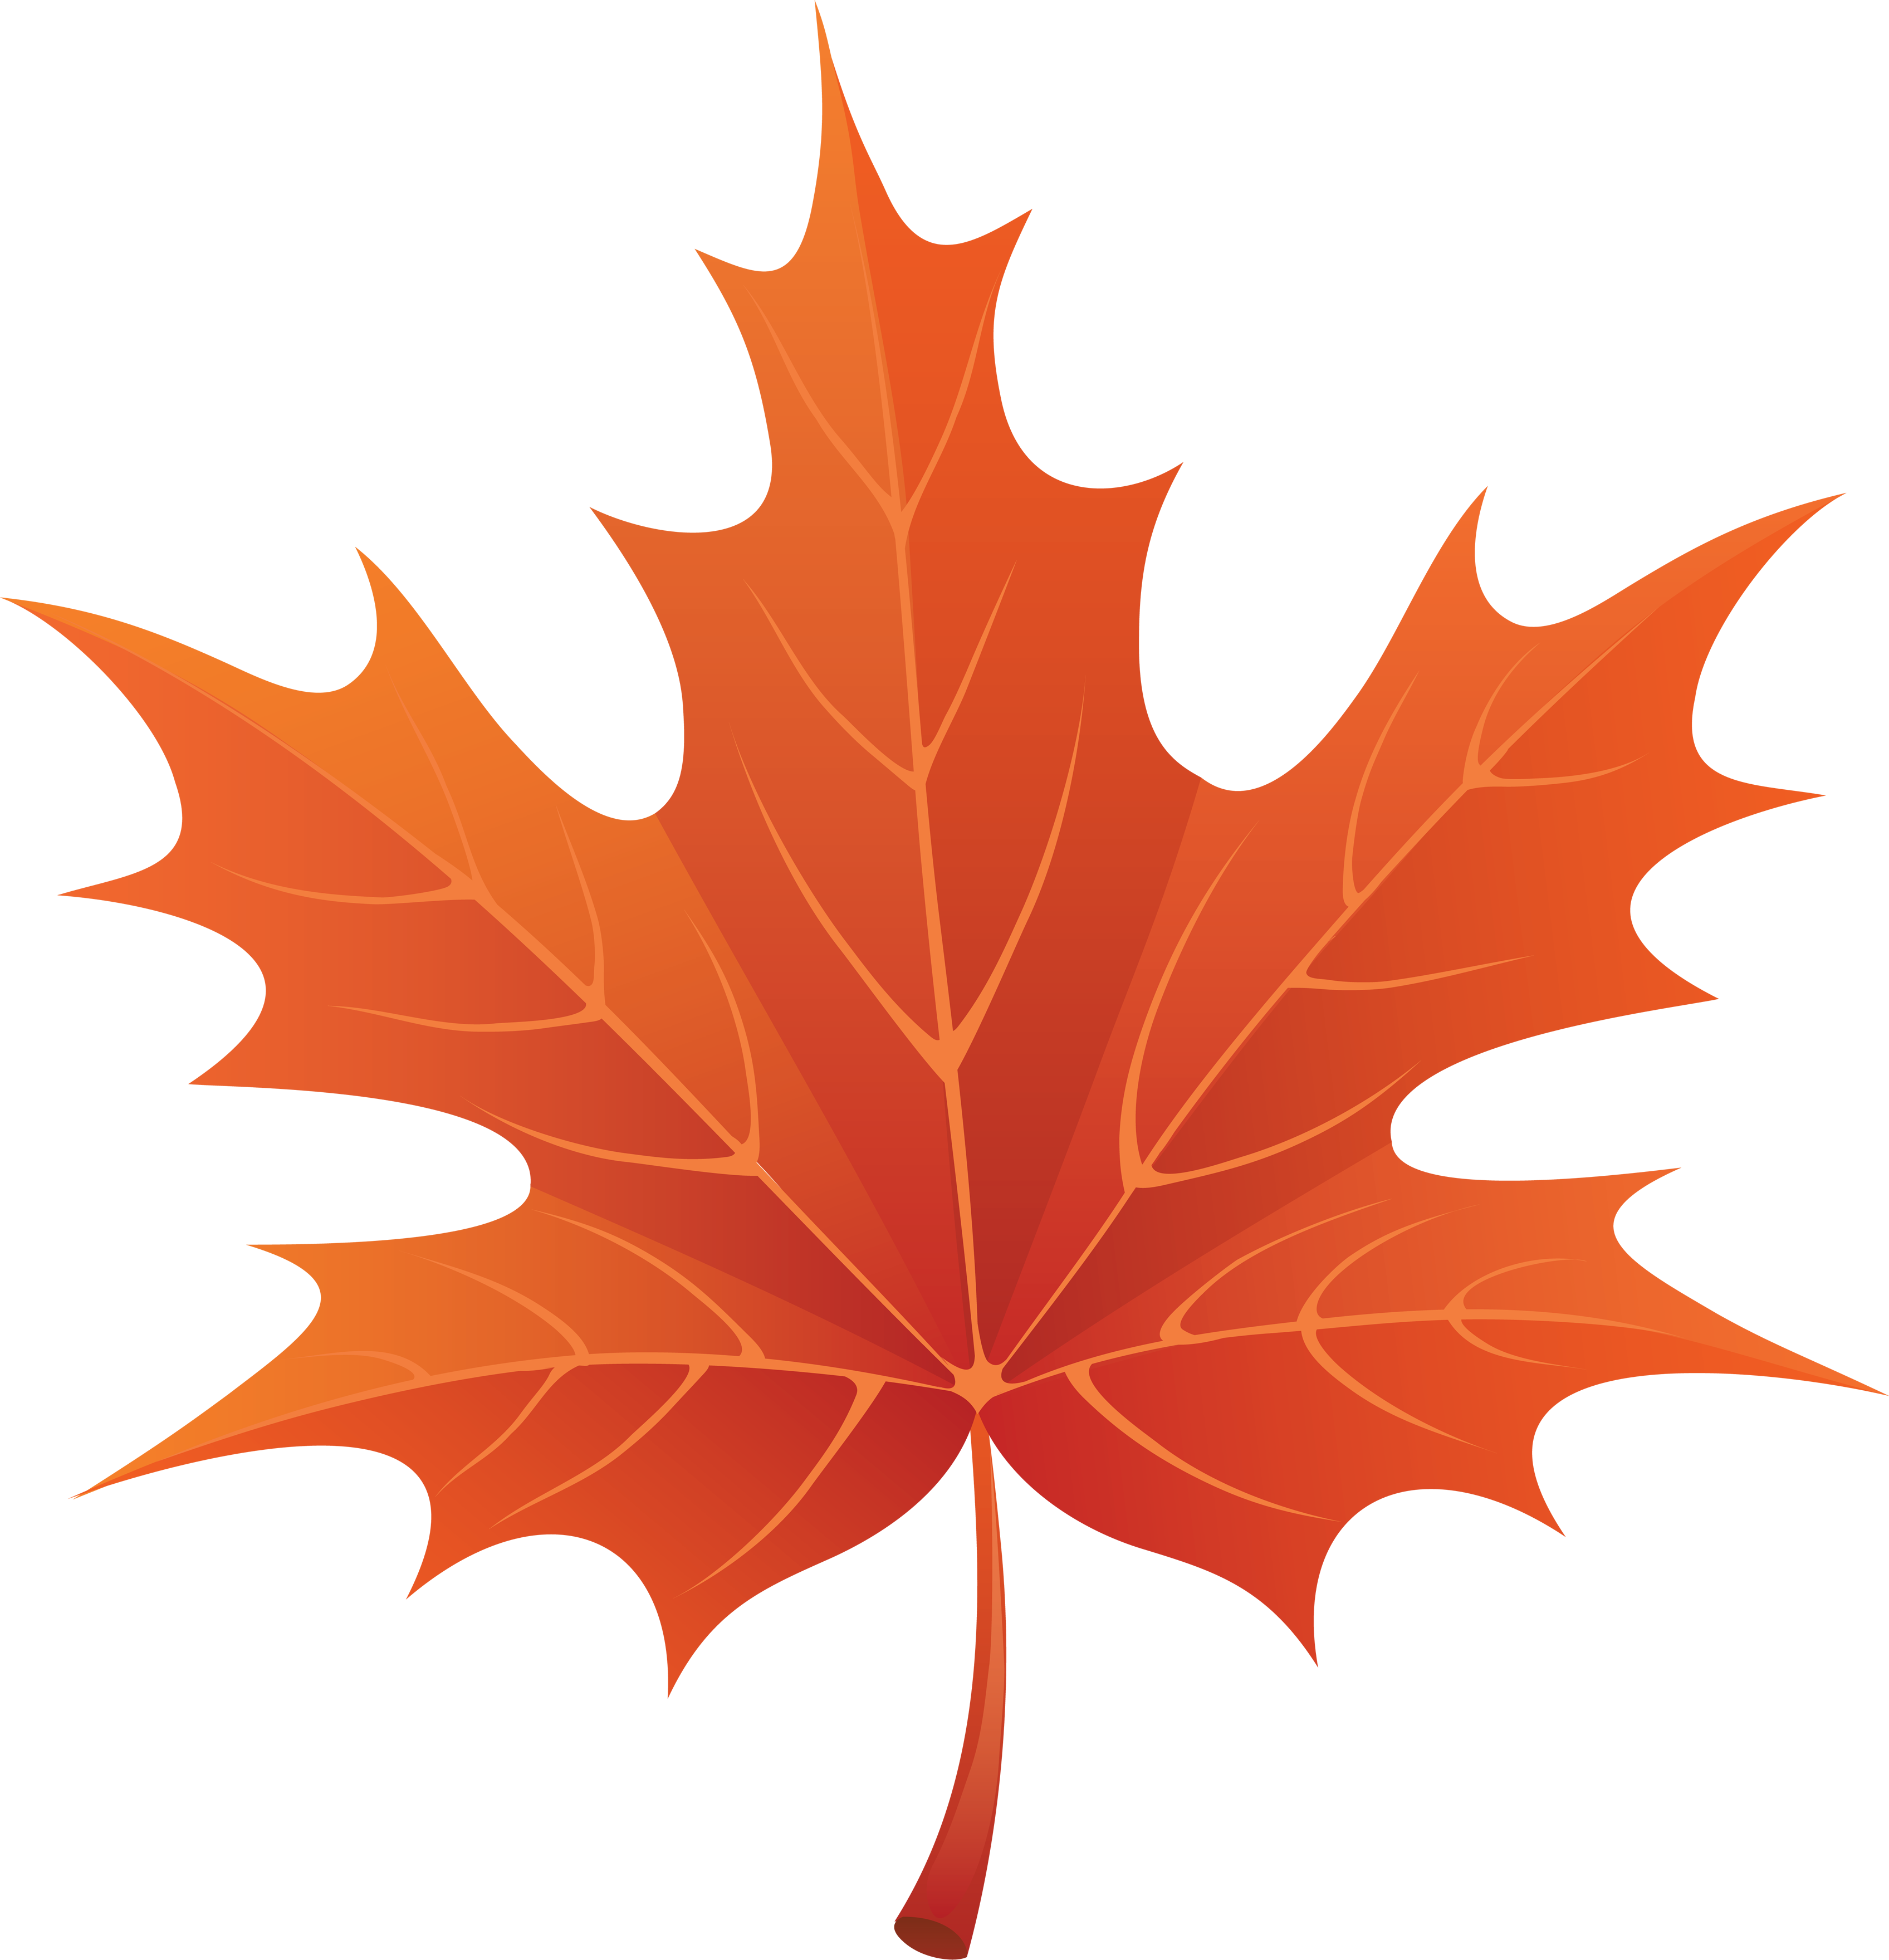 Fall leaves autumn images. Winter clipart foliage